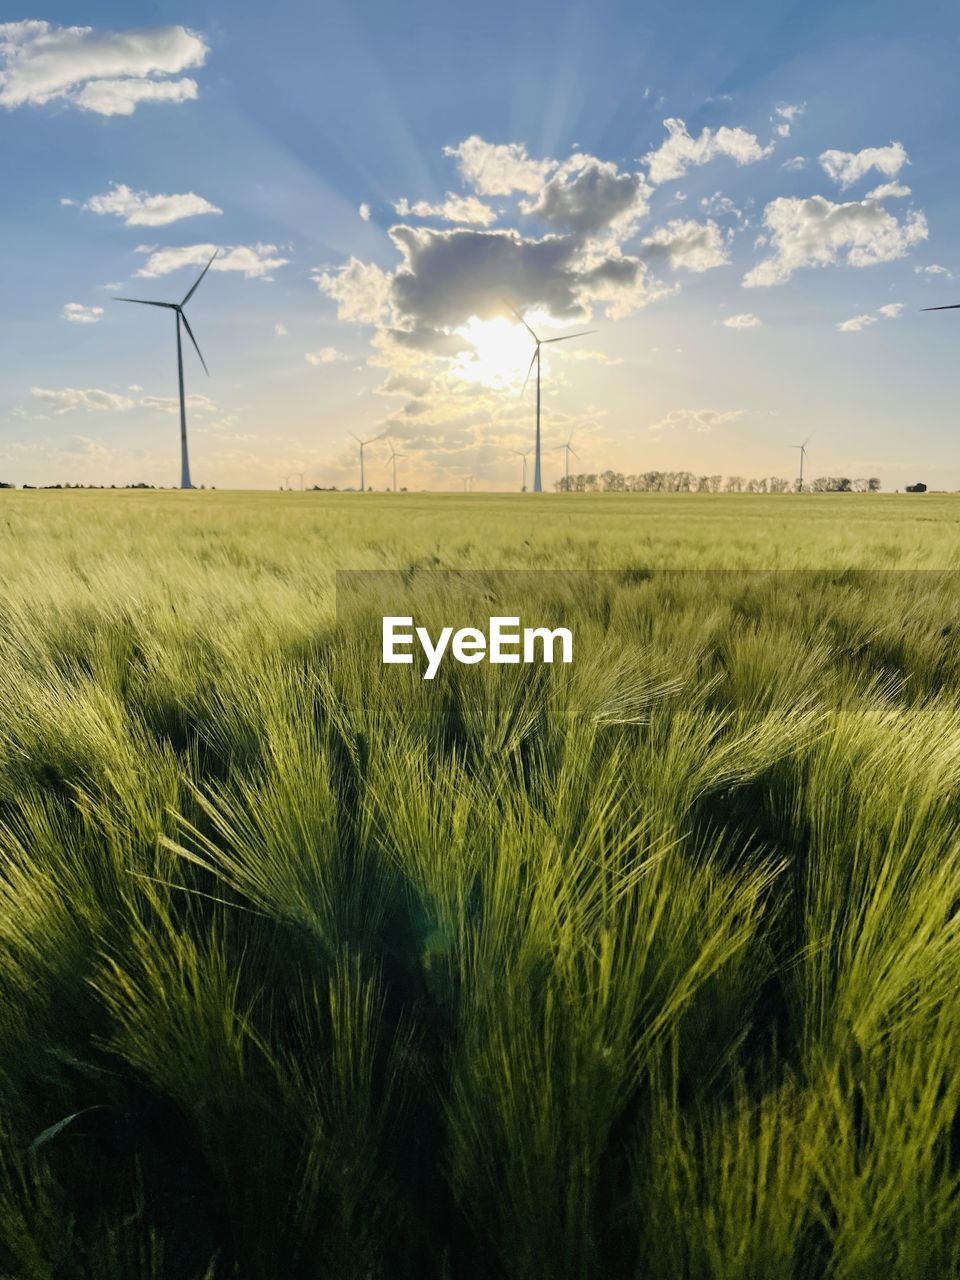 environment, landscape, sky, power generation, environmental conservation, field, renewable energy, land, plant, agriculture, rural scene, grass, alternative energy, nature, turbine, wind turbine, wind power, cloud, beauty in nature, rural area, prairie, grassland, crop, cereal plant, electricity, plain, growth, wind, horizon, scenics - nature, barley, sunlight, technology, no people, environmental issues, sustainable resources, farm, outdoors, windmill, meadow, food, social issues, power supply, horizon over land, tranquility, blue, green, power in nature, tranquil scene, day, sunset, urban skyline